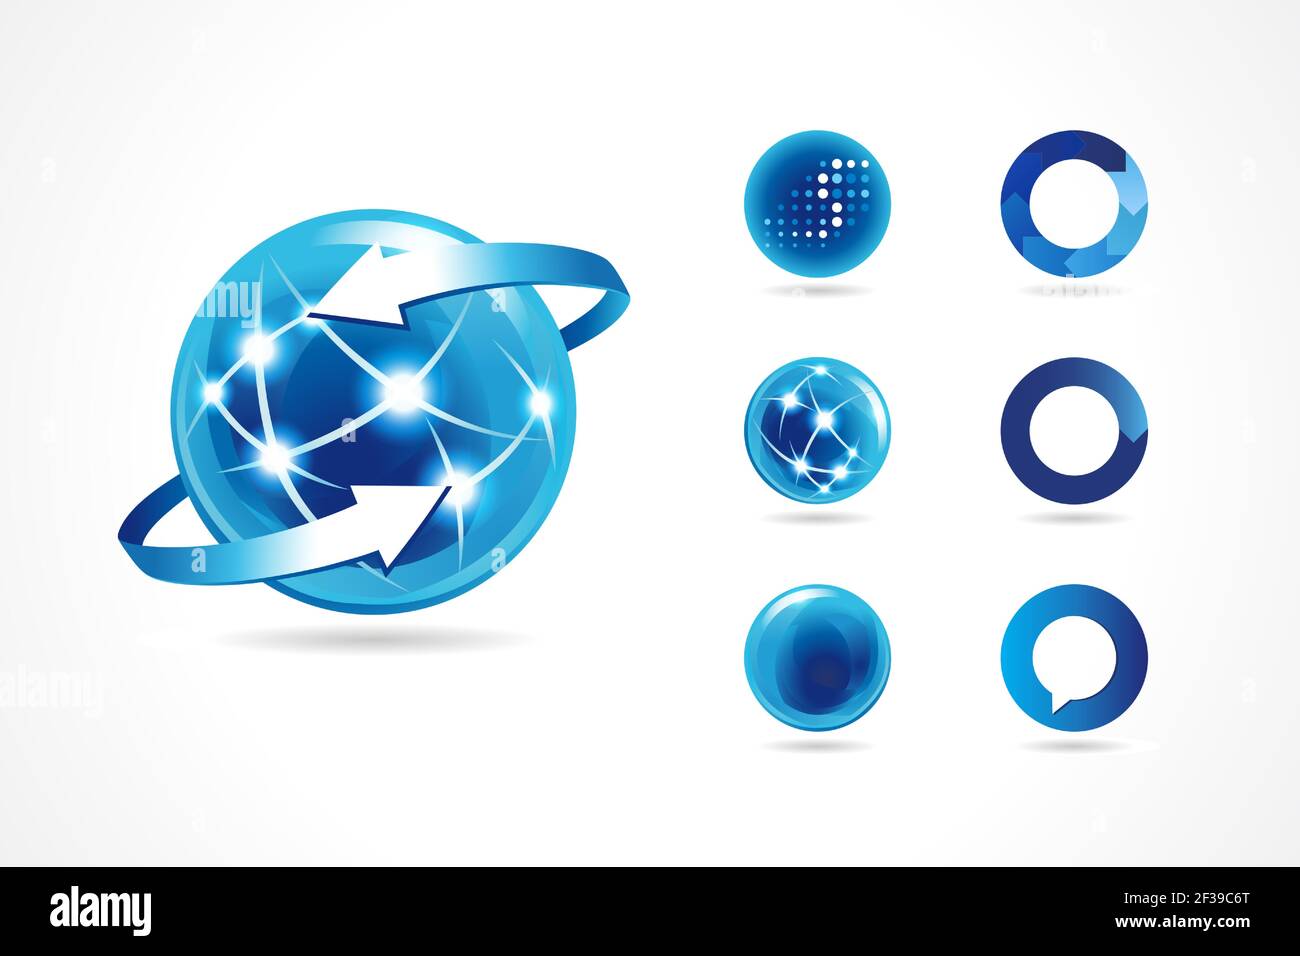 Set of 7 sphere globe logo with 3d effect, also suitable as icon or design element for global business, communication, technology, internet. Vector Stock Vector